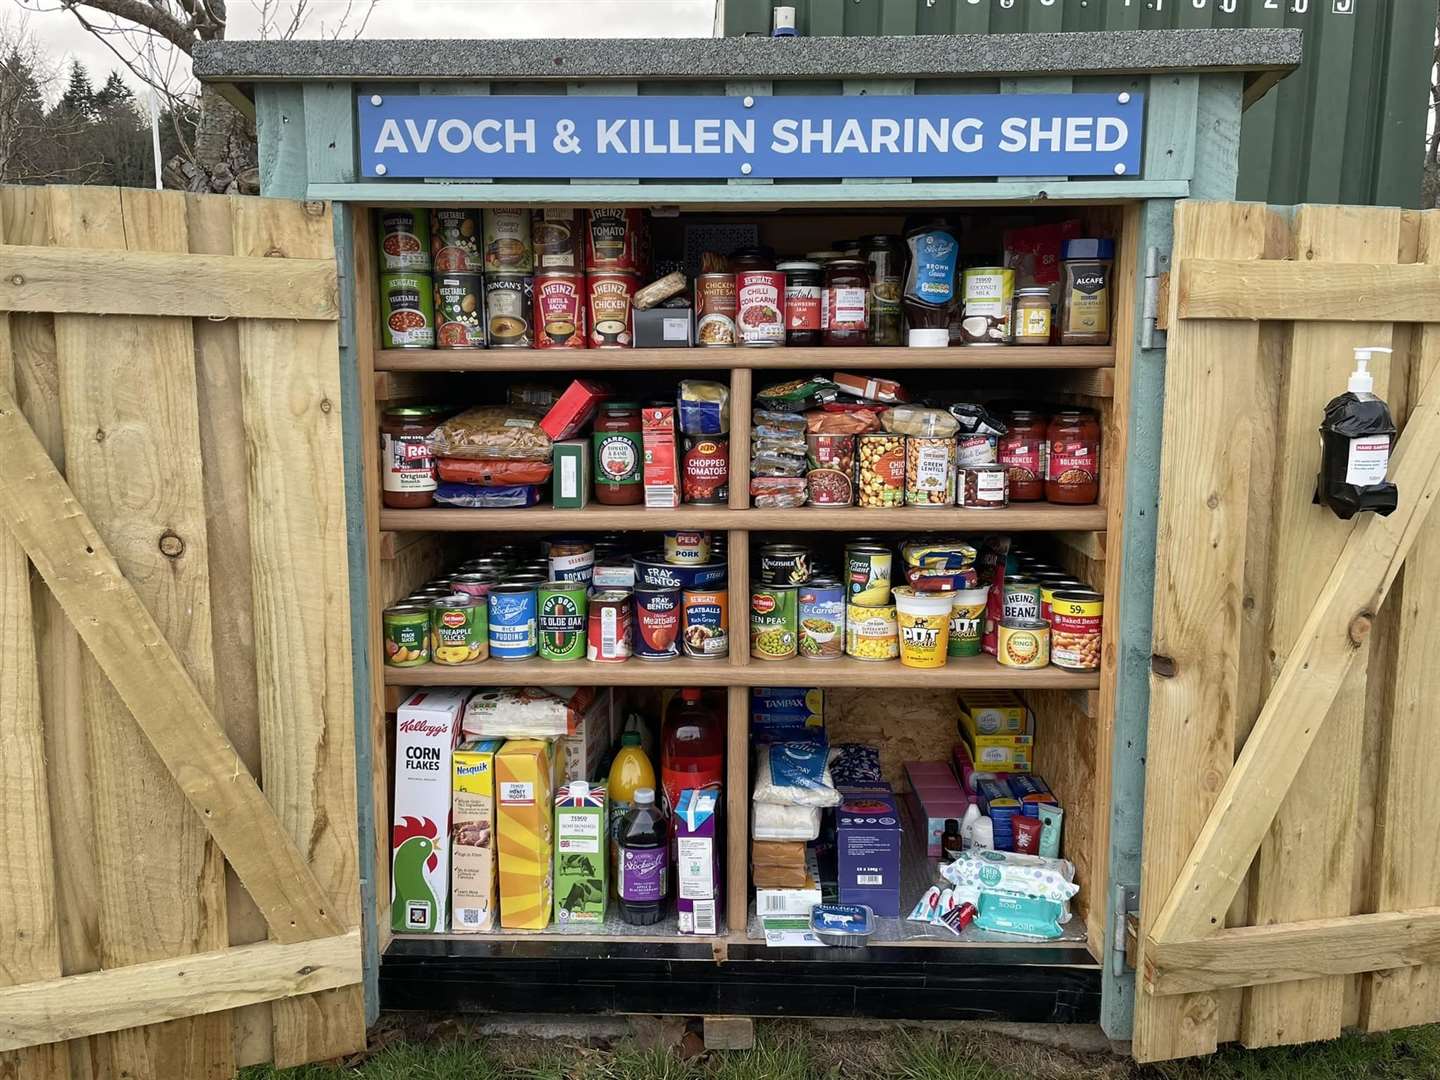 A well restocked Avoch and Killen Sharing Shed.